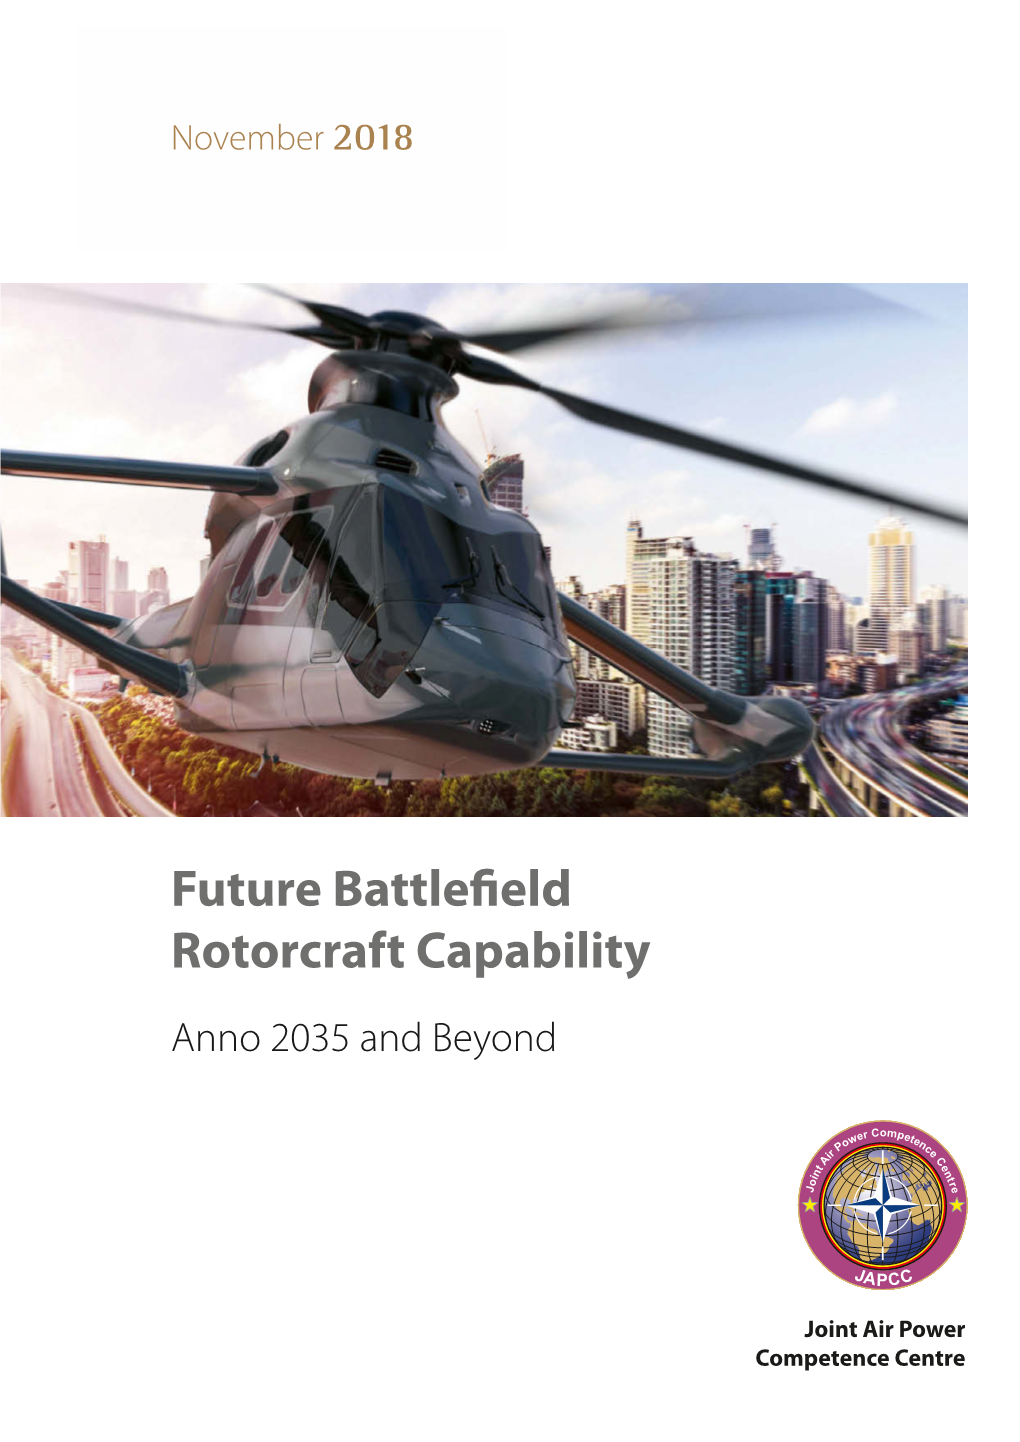 Future Battlefield Rotorcraft Capability (FBRC) – Anno 2035 and Beyond